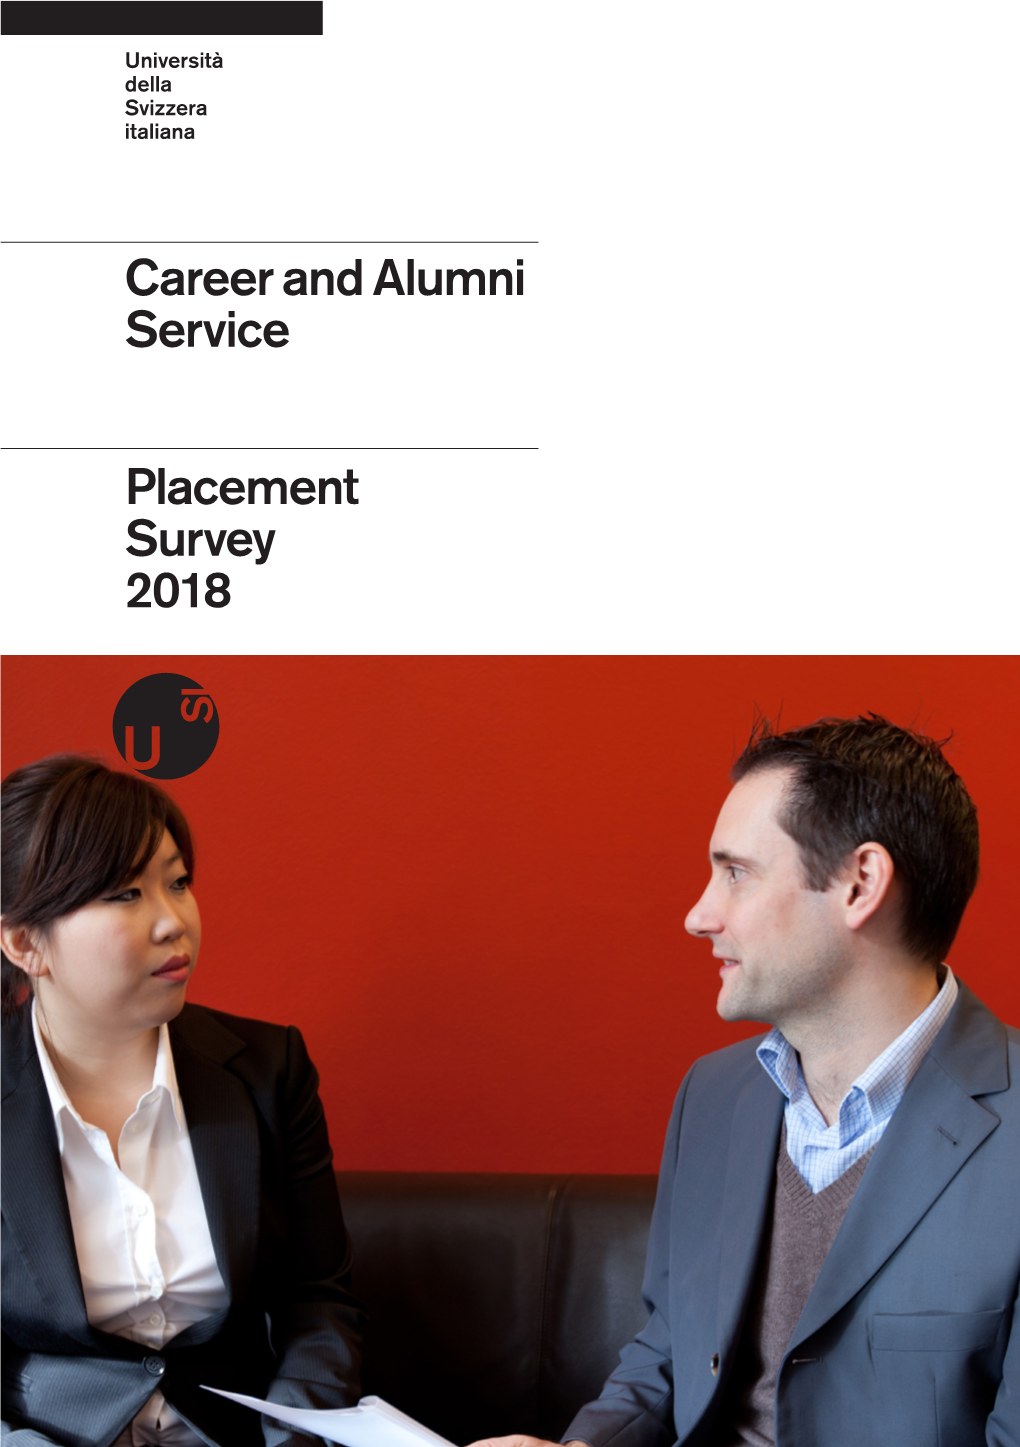 Career and Alumni Service Placement Survey 2018